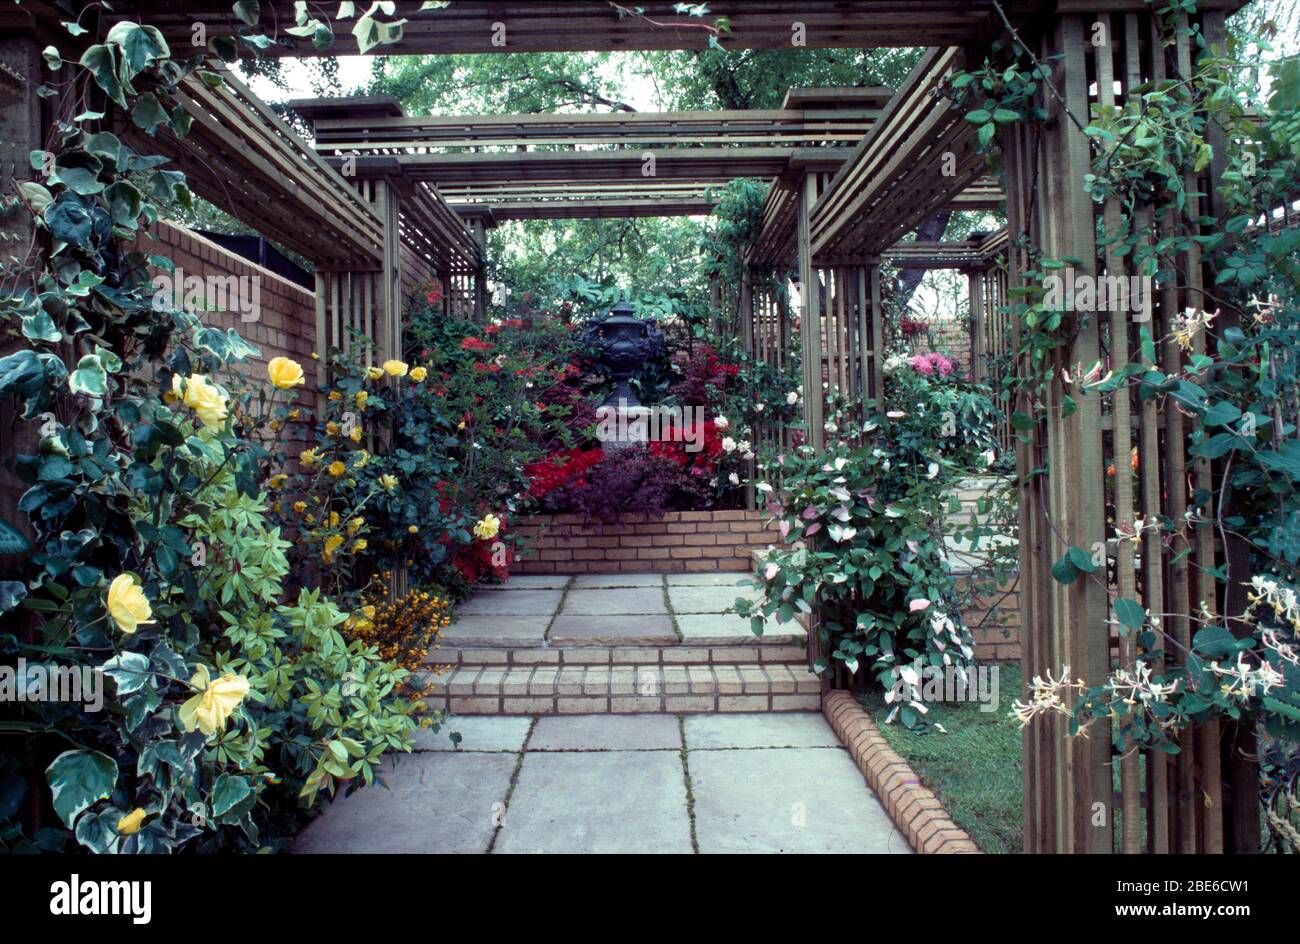 Formal paved  pergola with roses, honeysuckle and  ivy leading a raised bed with sculpture and massed azeleas. Stock Photo